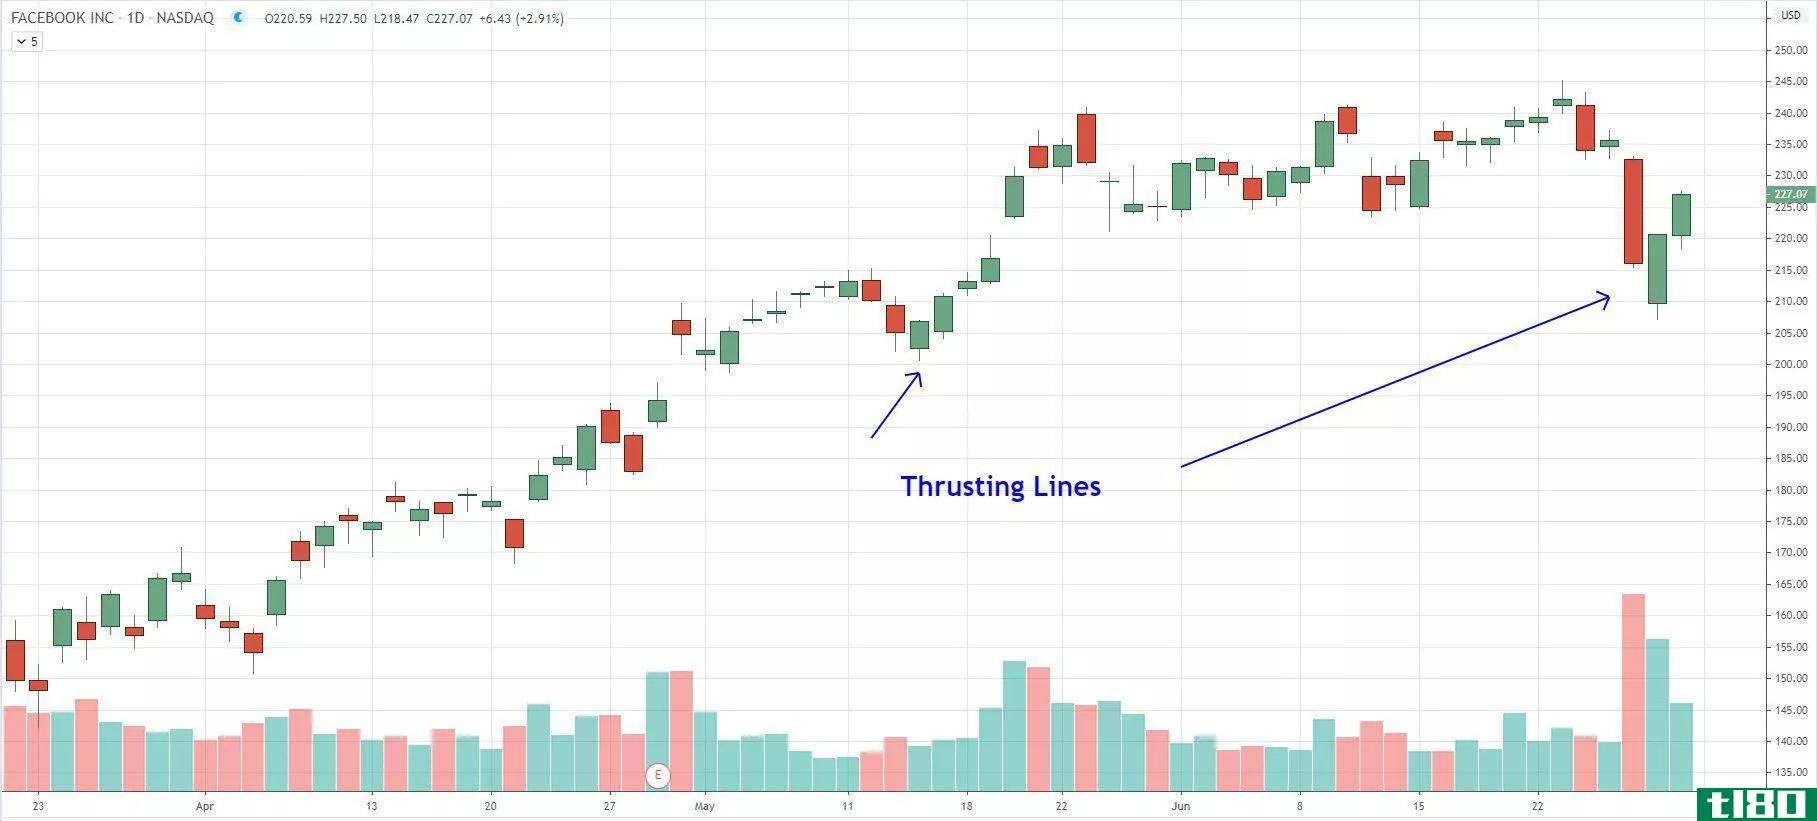 Thrusting Line example on Facebook Daily Chart